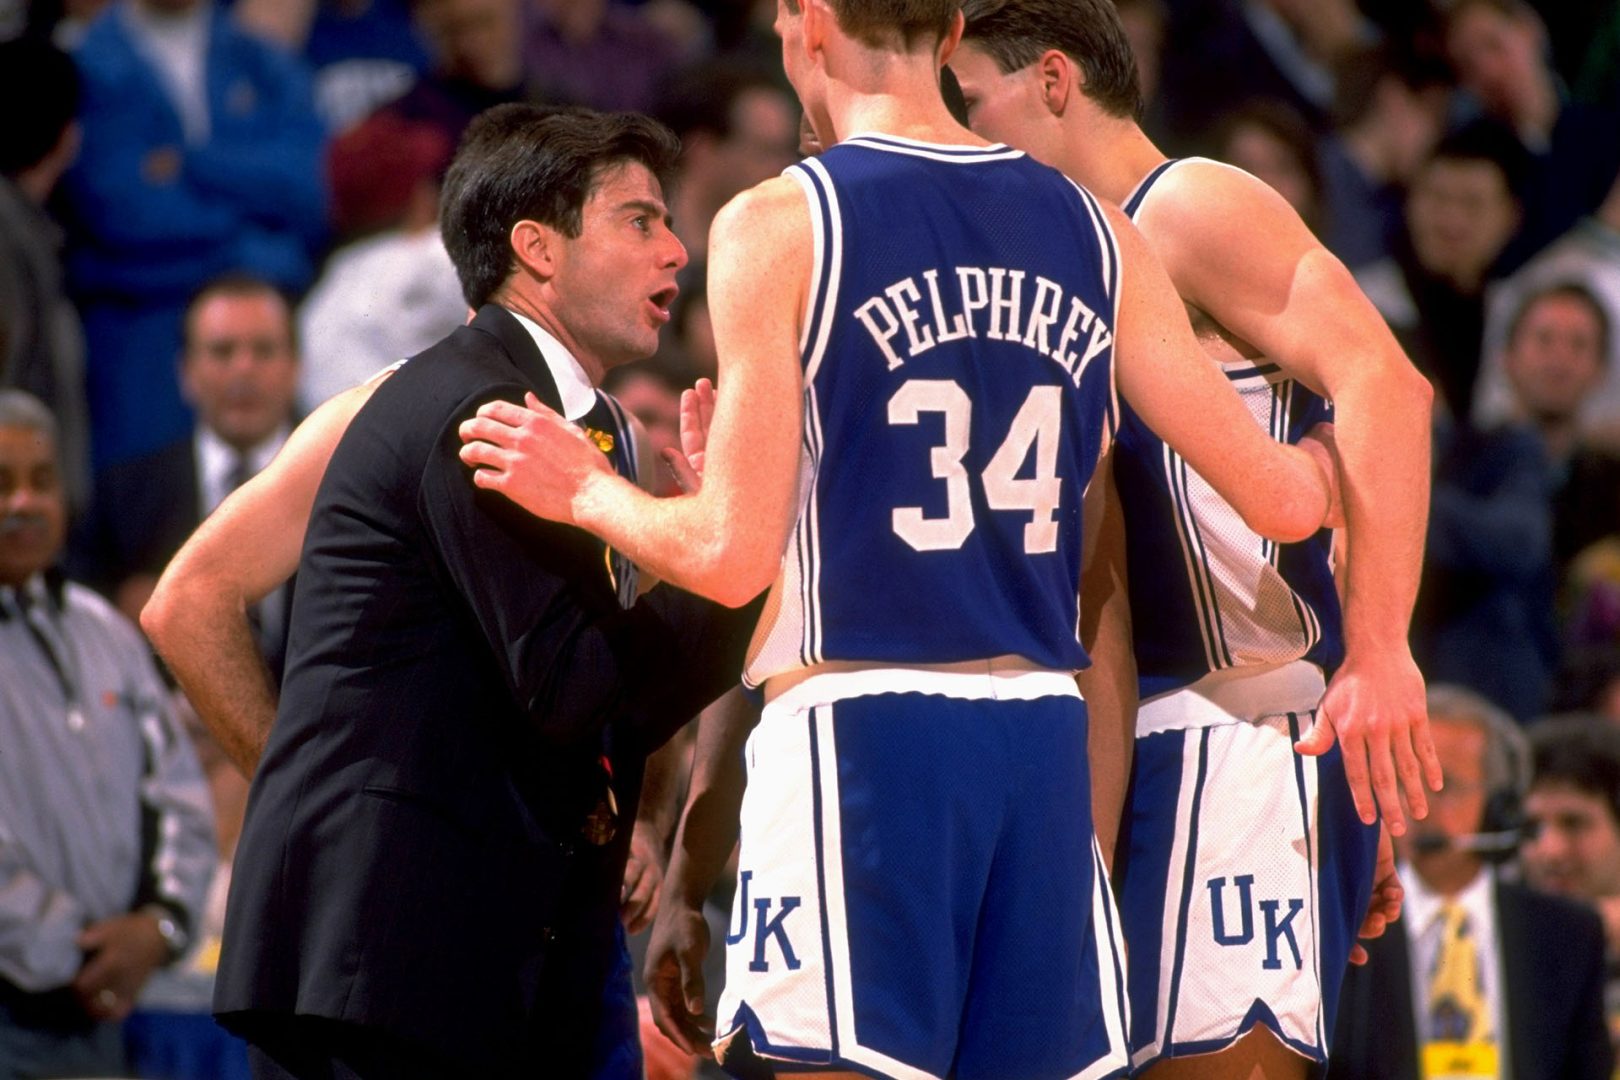 The Greatest Game Ever Played: Chronicling Duke and Kentucky’s Illustrious 1992 Elite Eight Matchup